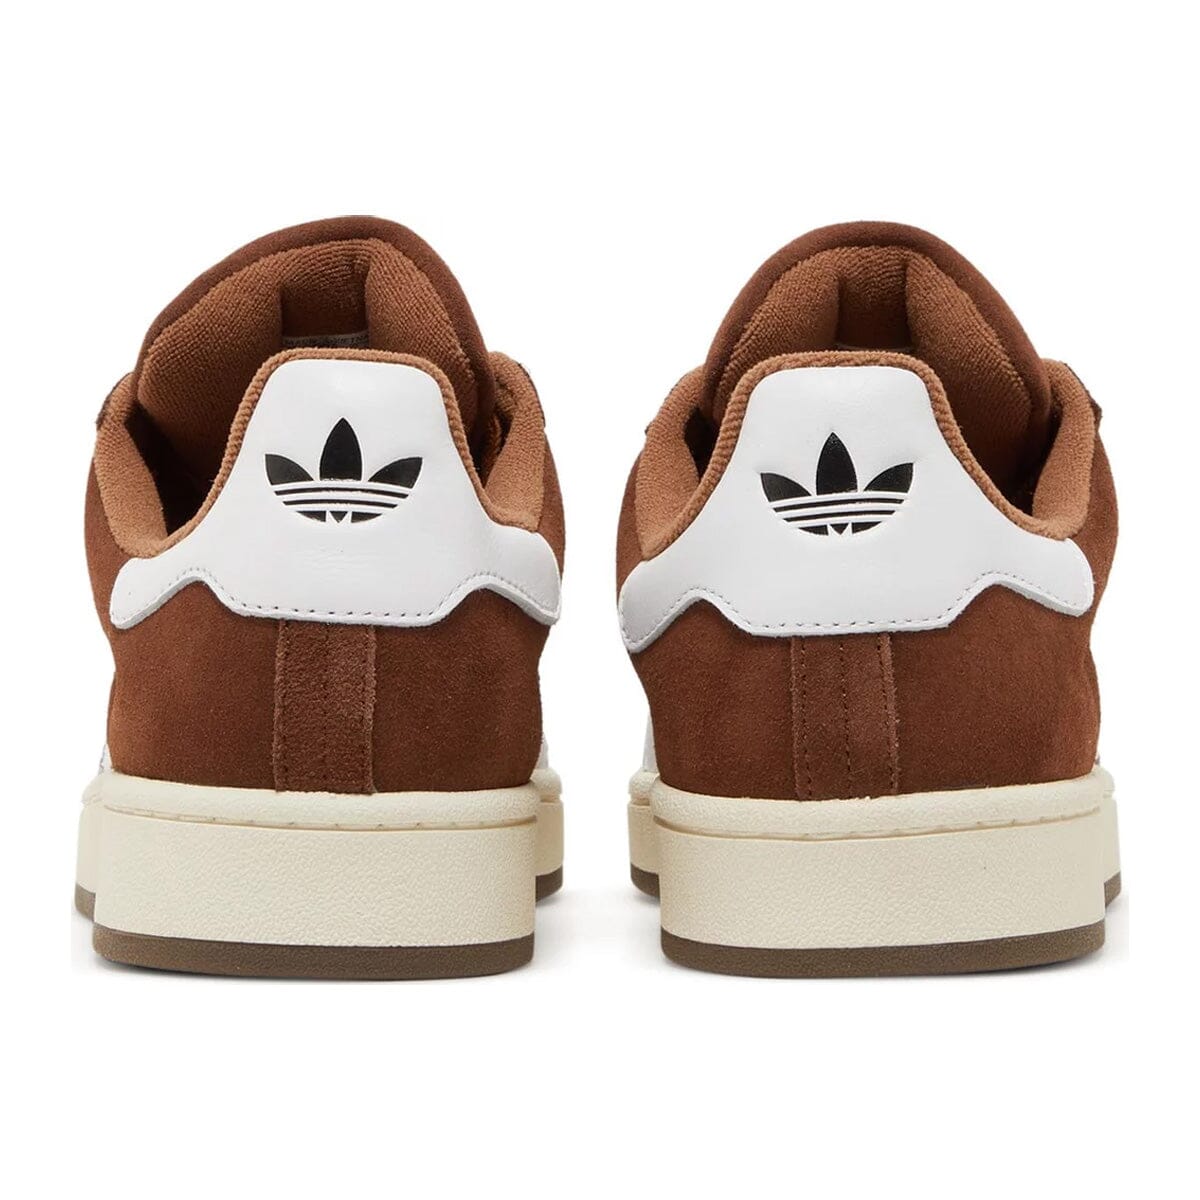 Adidas Campus 00s Bark Brown Adidas Campus 00s Blizz Sneakers 